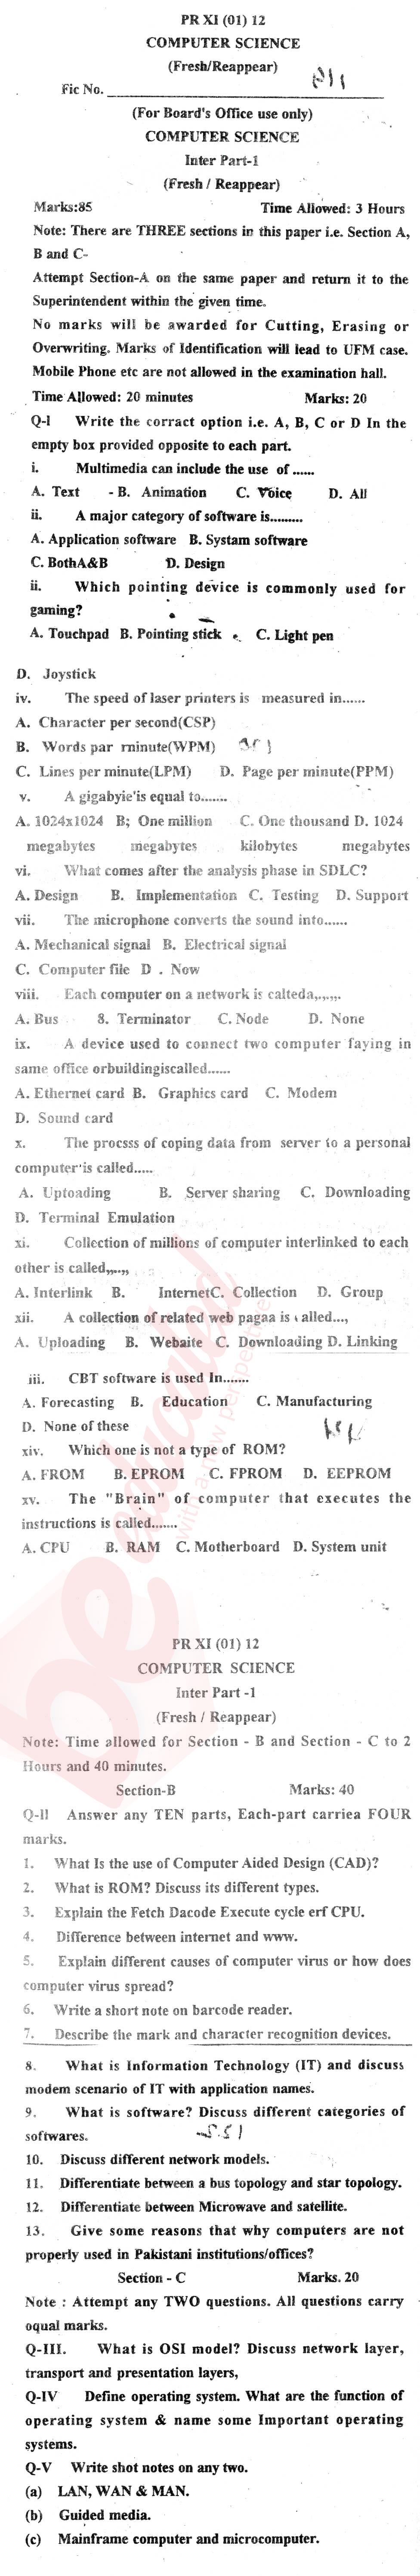 Computer Science ICS Part 1 Past Paper Group 1 BISE Bannu 2012